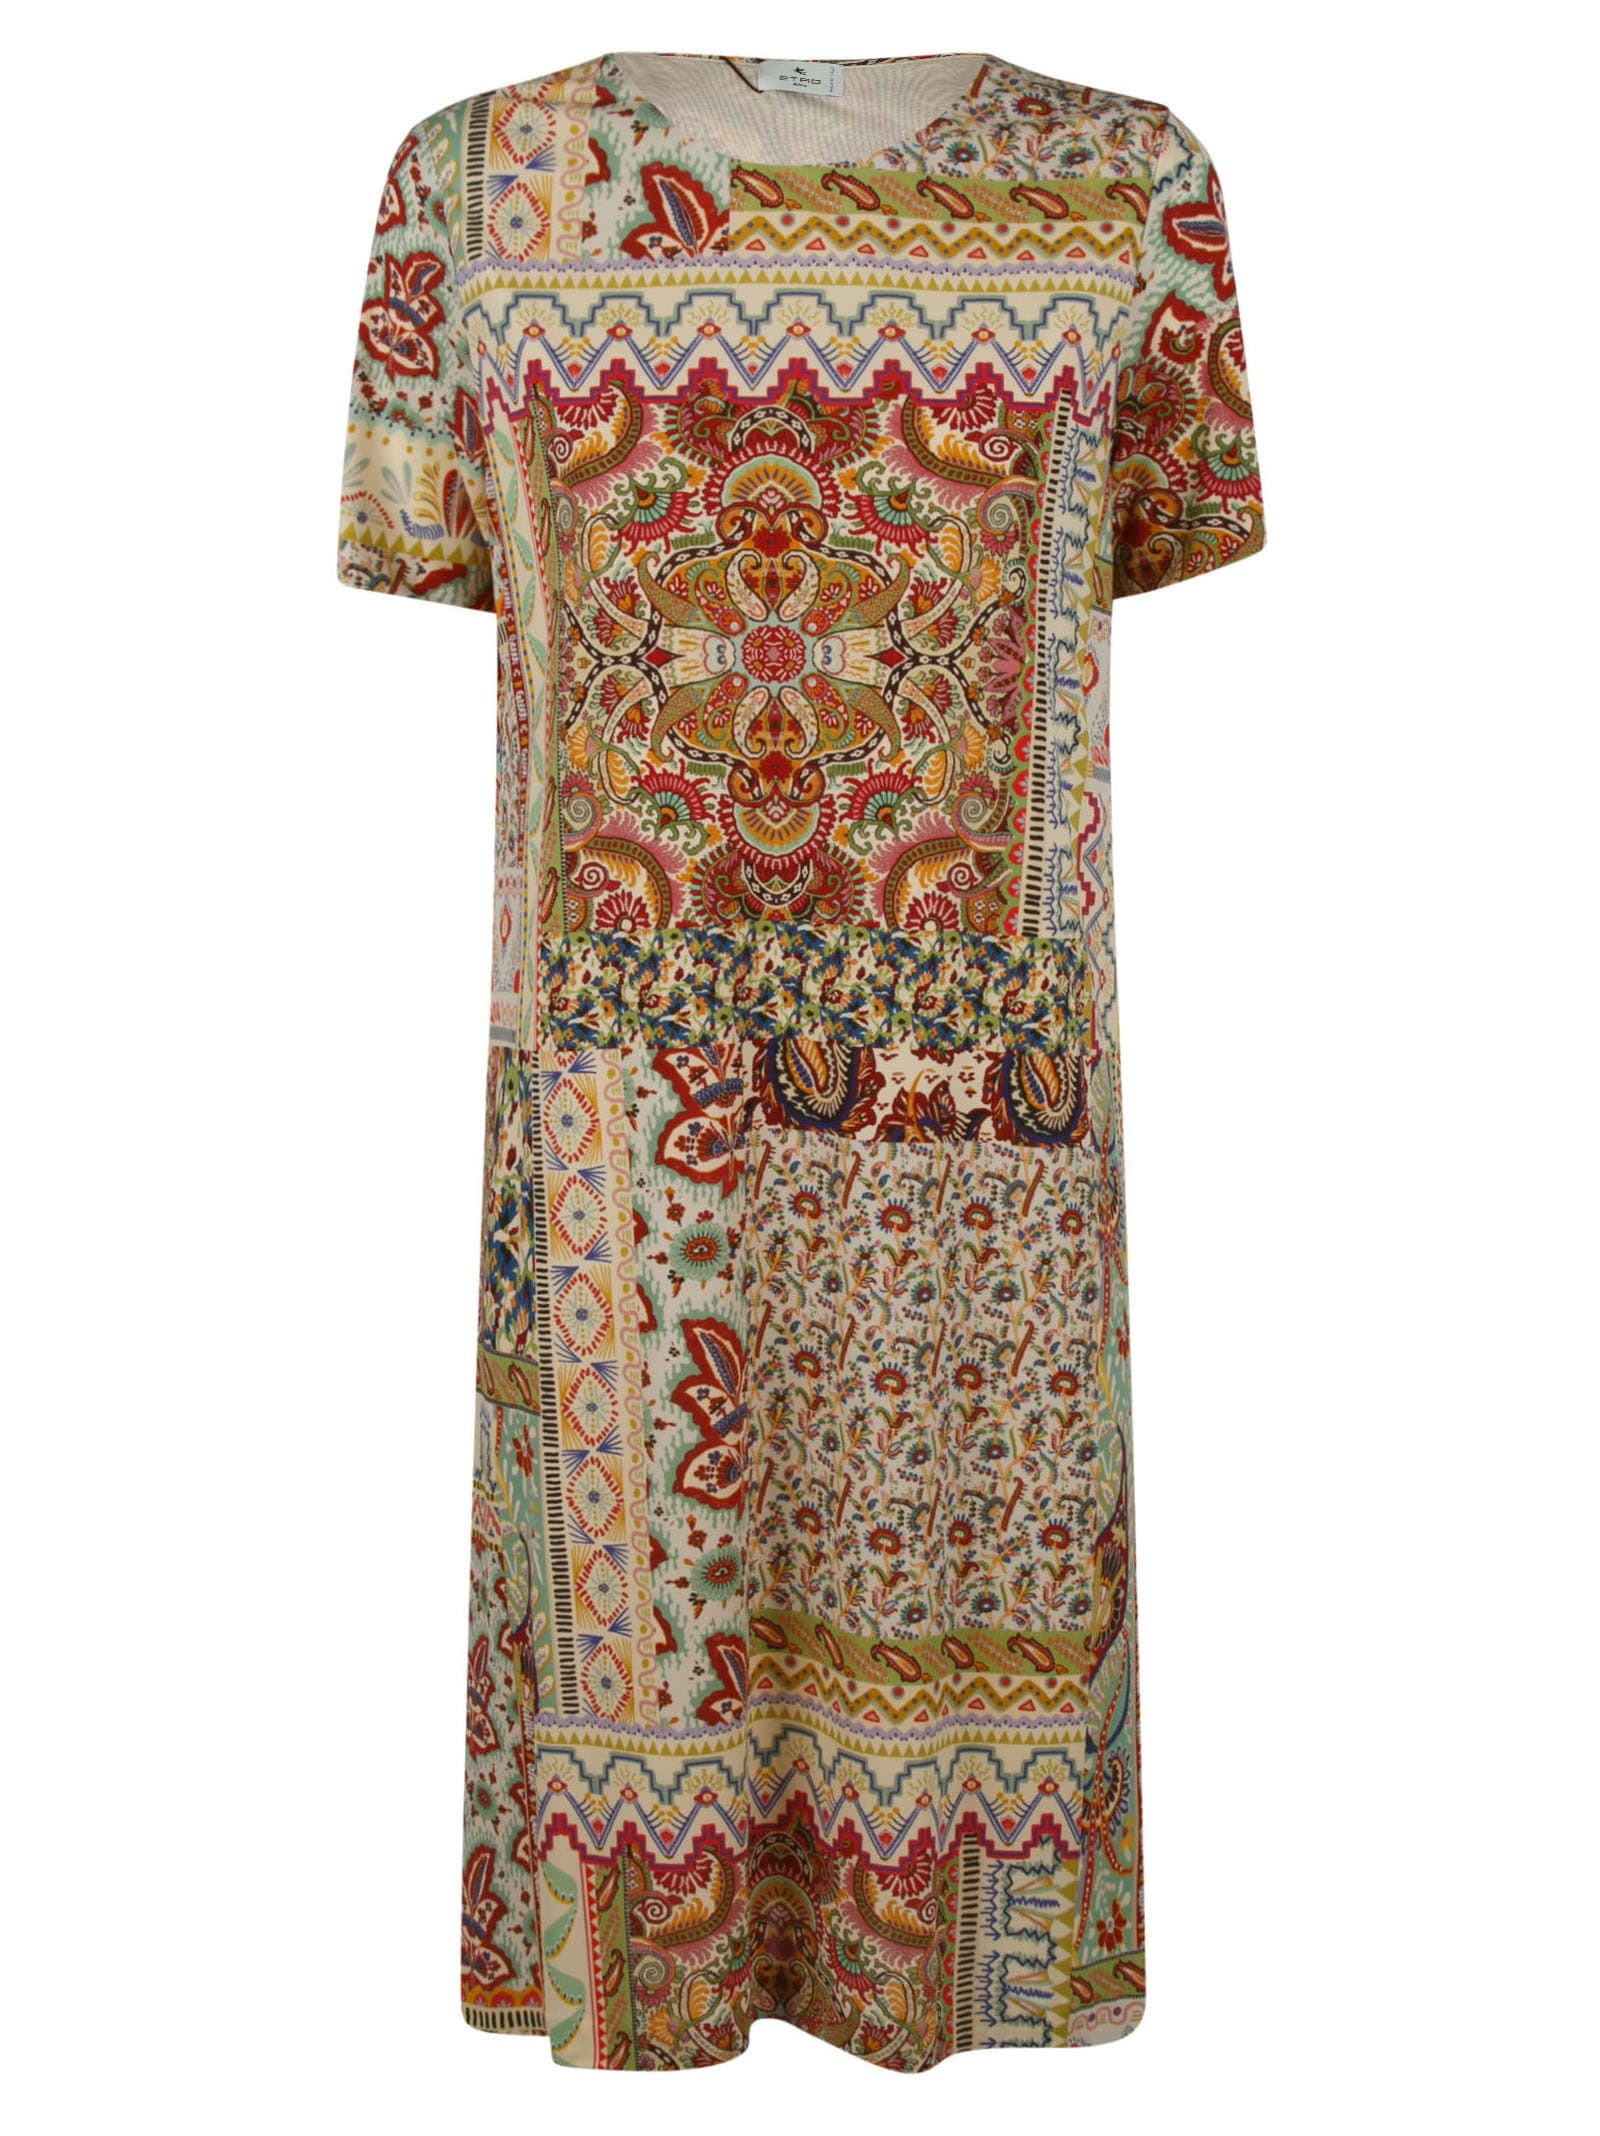 Etro All-over Printed Dress